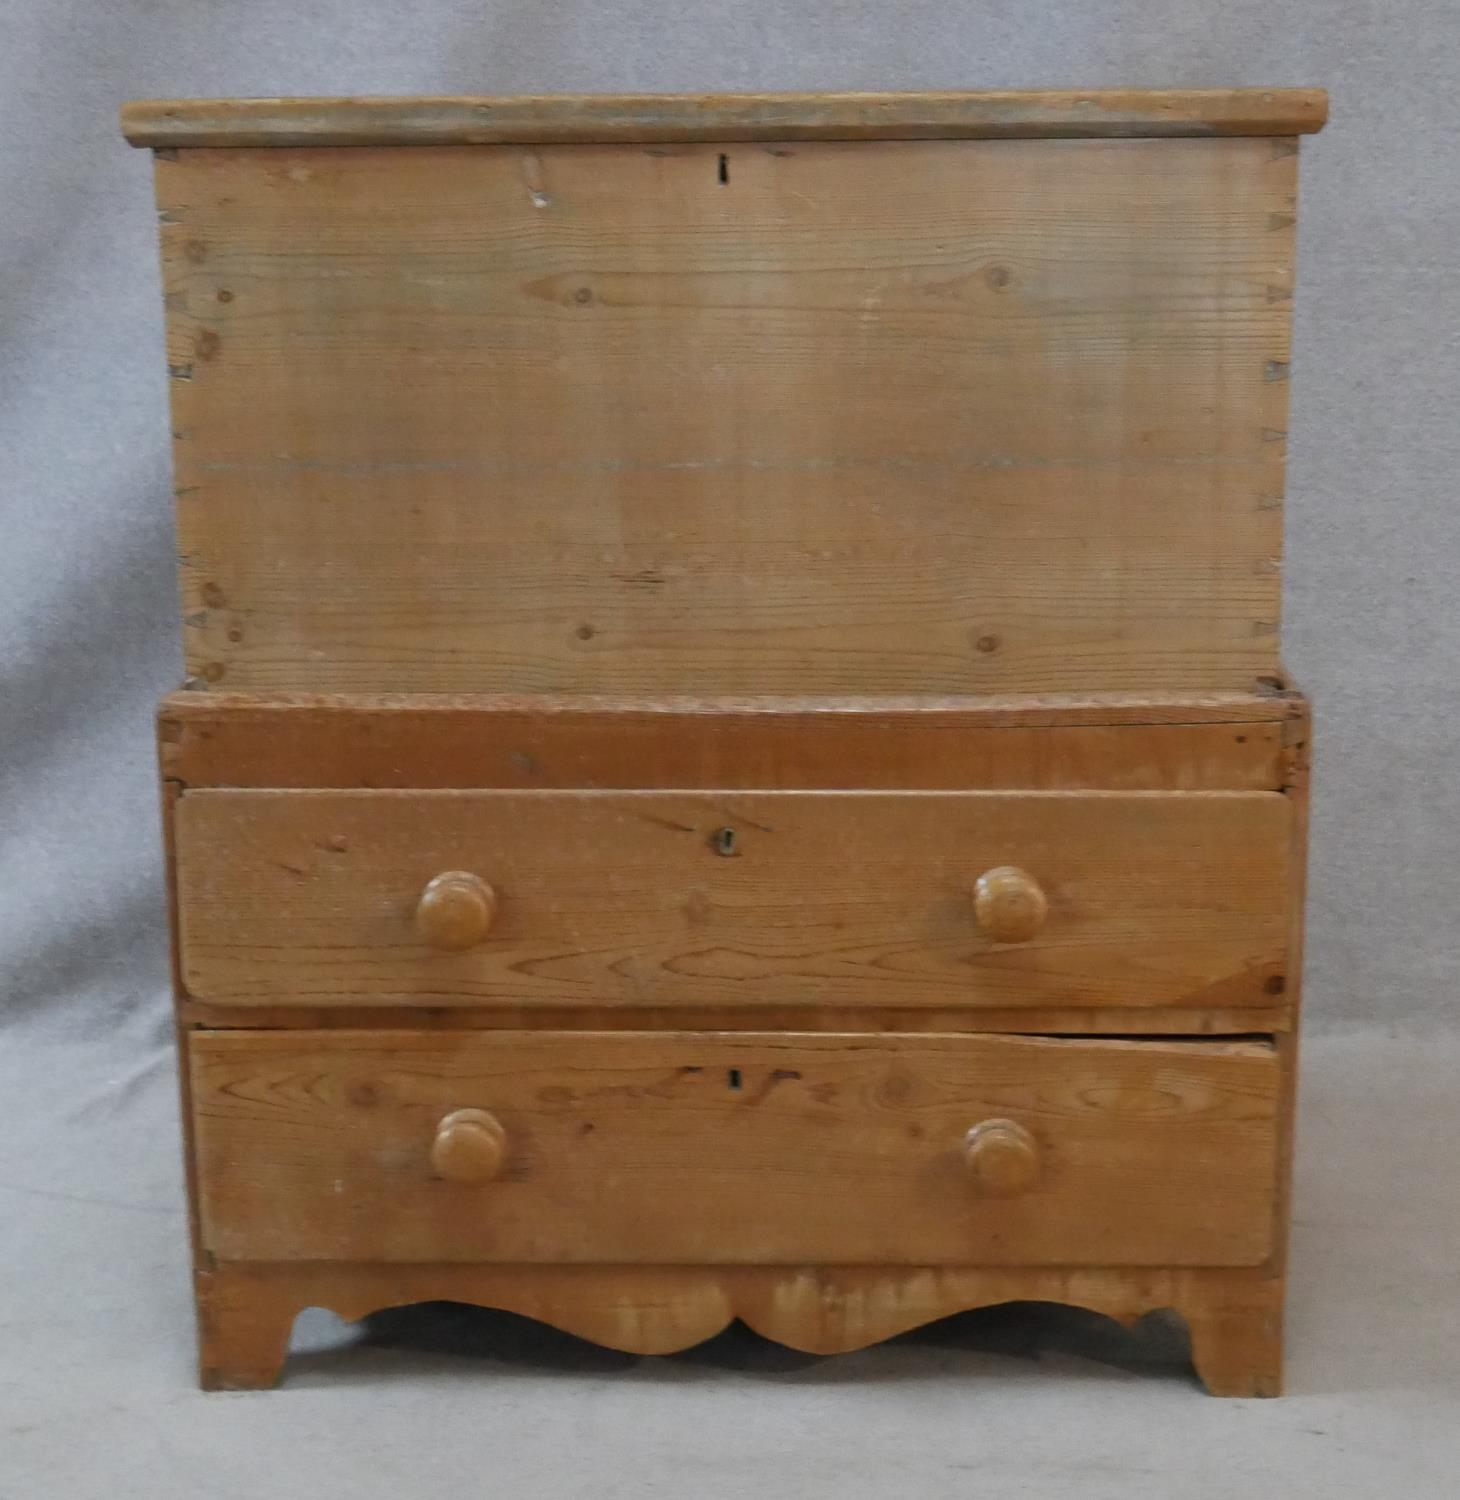 A 19th century pine mule chest with lidded coffer section fitted with candle slide above two drawers